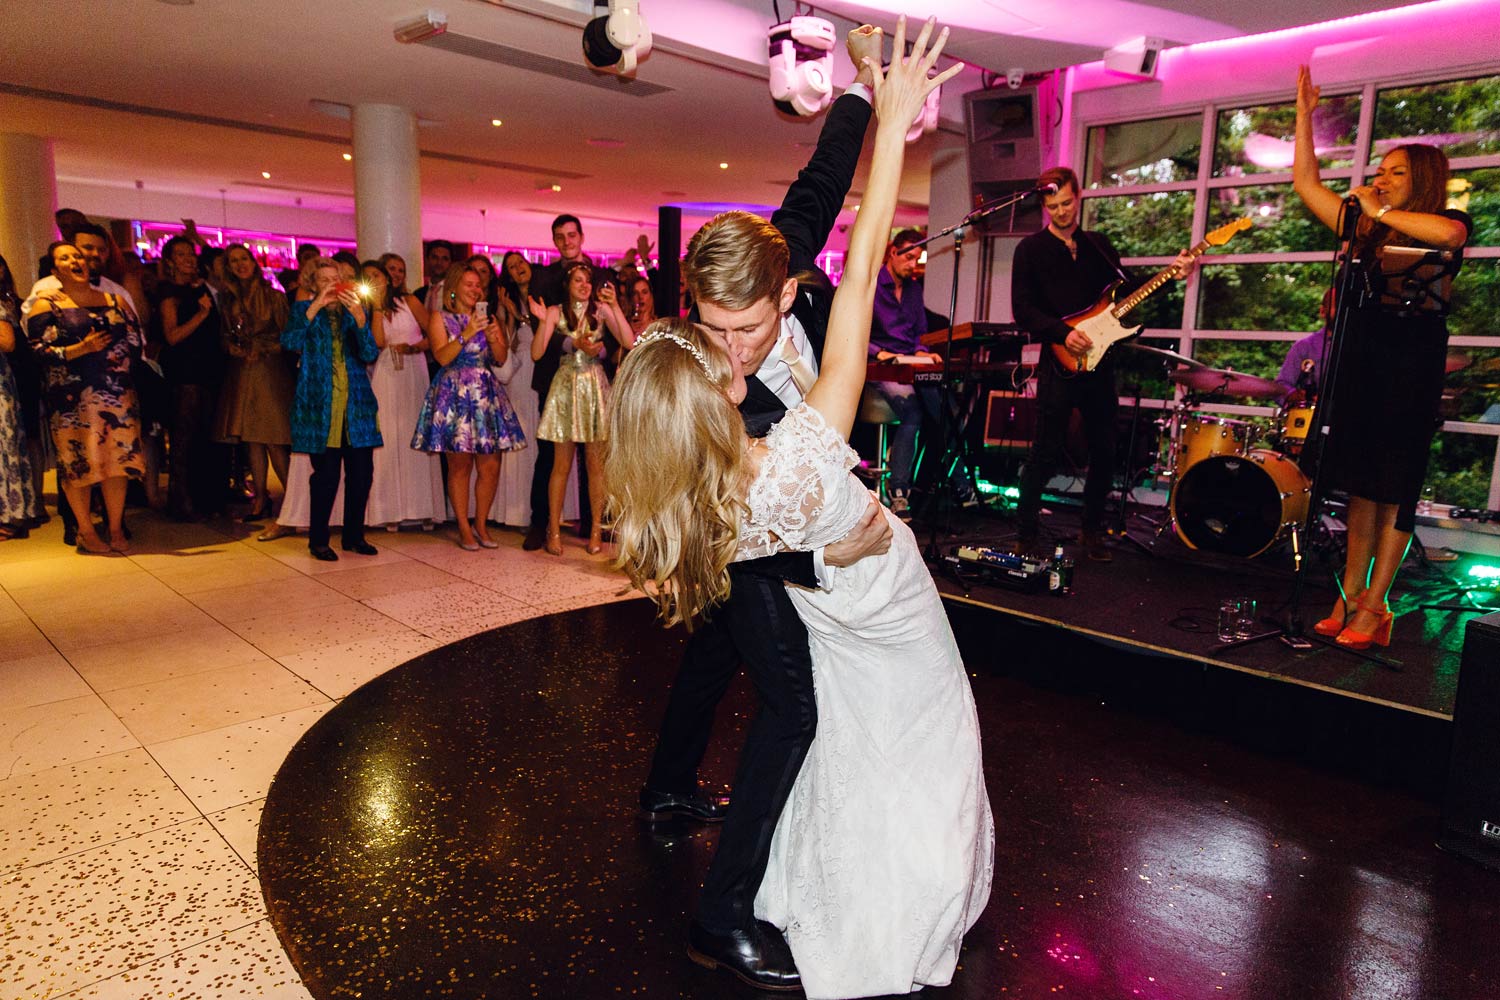 The first wedding dance at the Roof Gardens in Kensington - London wedding photographer